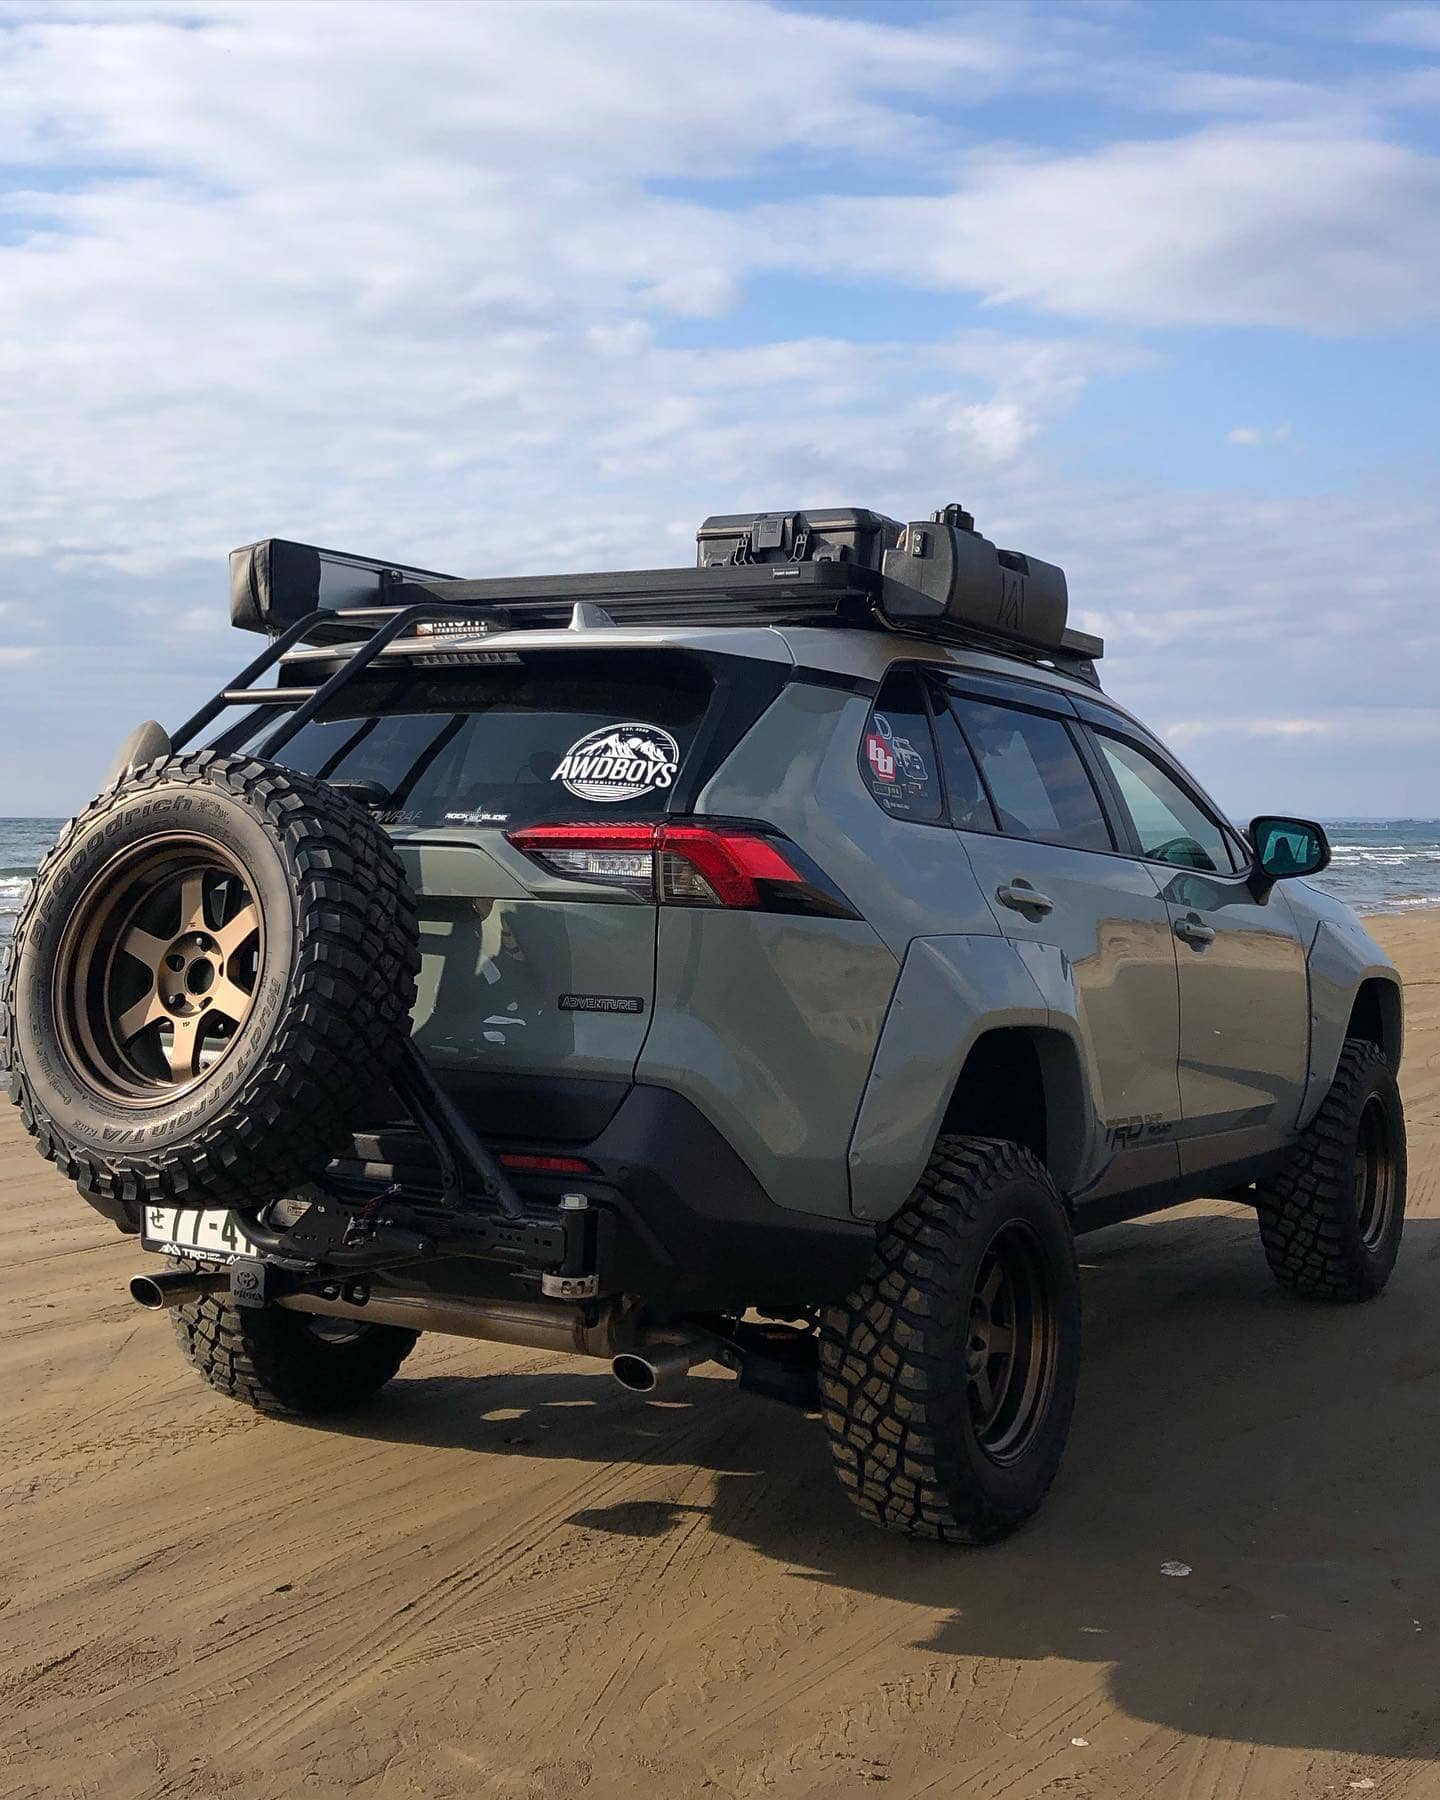 Toyota Rav4 With Wide Fender Flares and 31” Offroad Tires